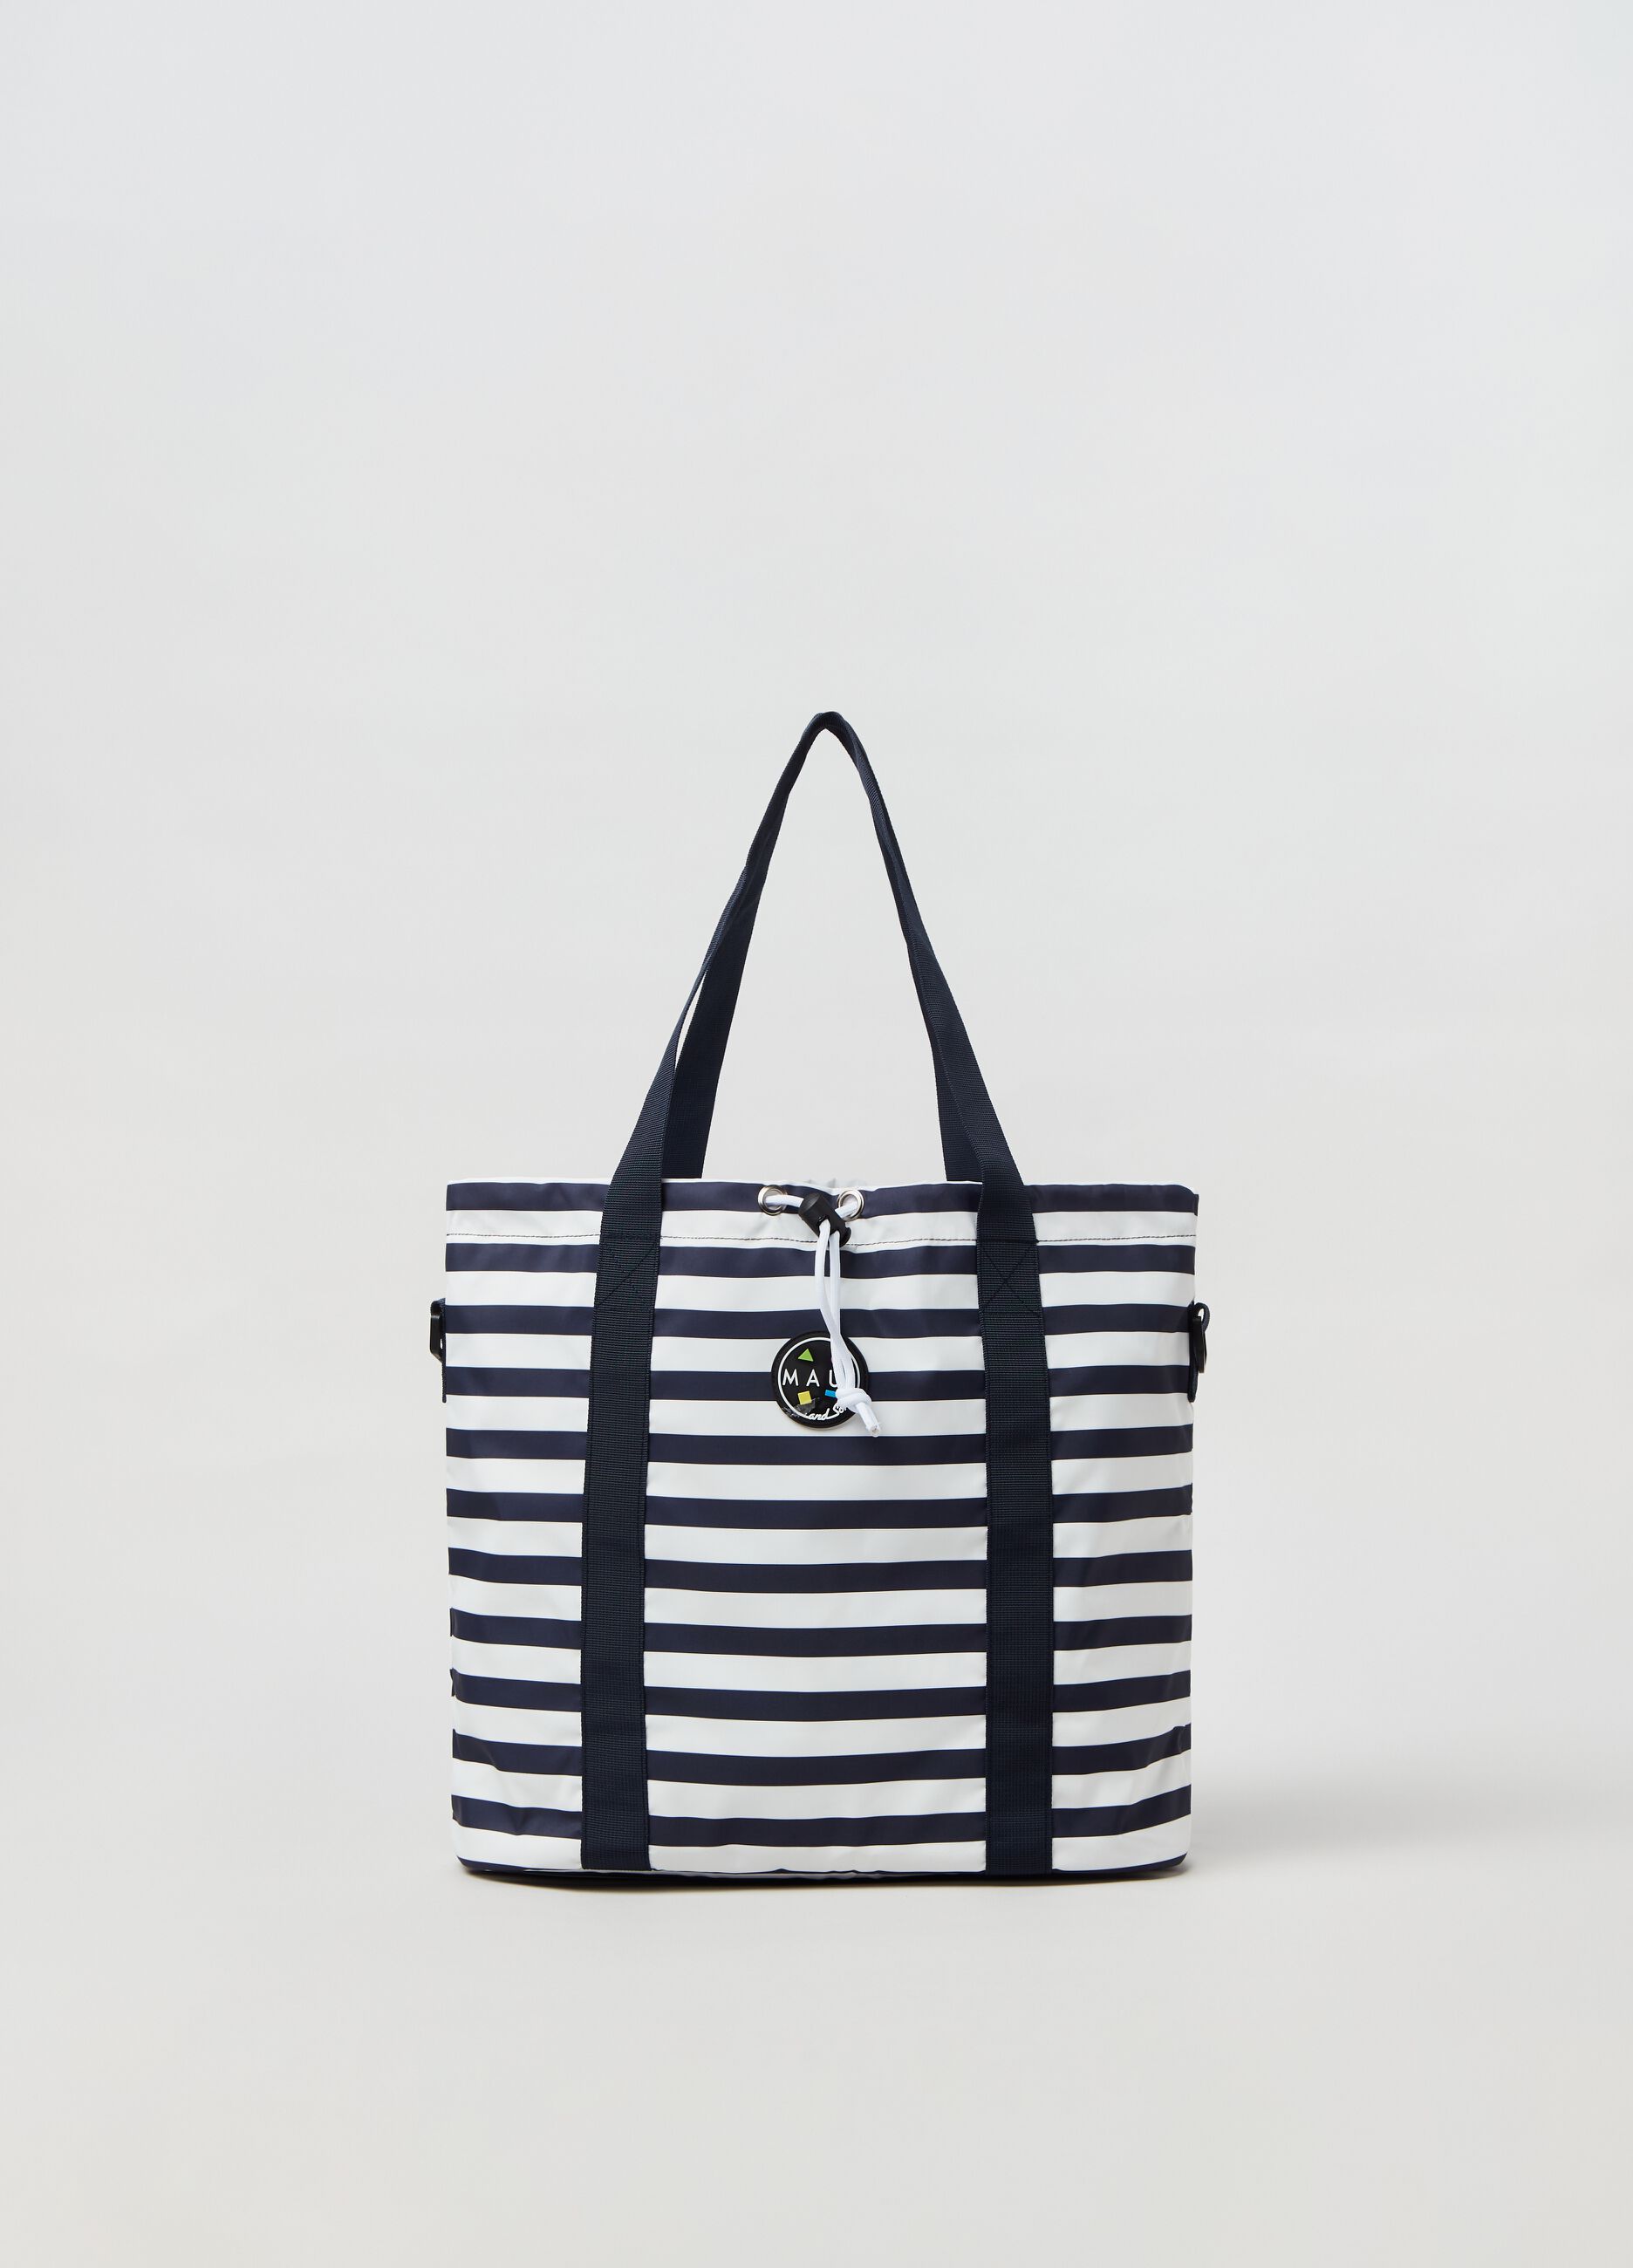 Beach bag by Maui and Sons